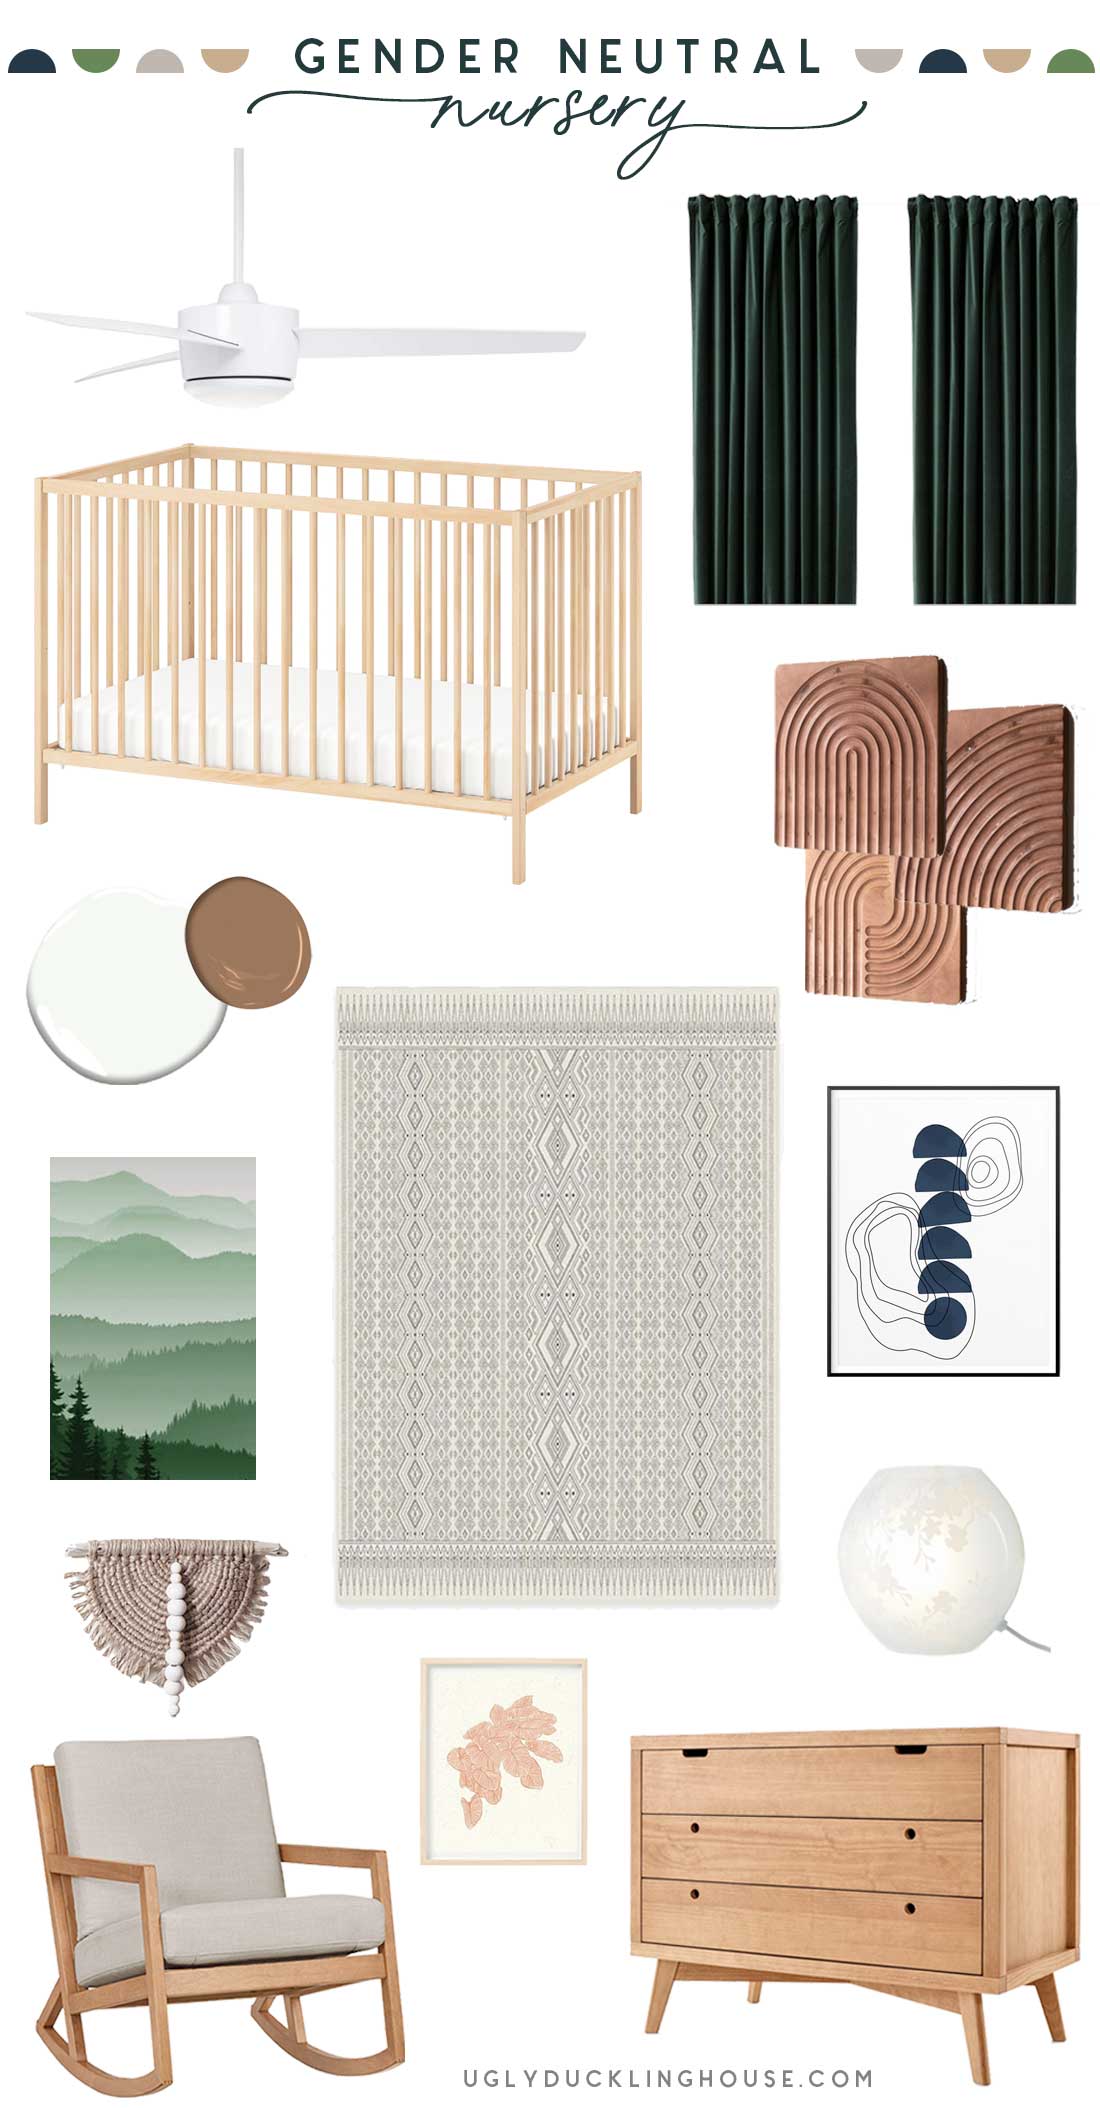 gender neutral nursery - using greens and lots of wood elements to create a neutral green navy and brown nursery with no cutesy theme